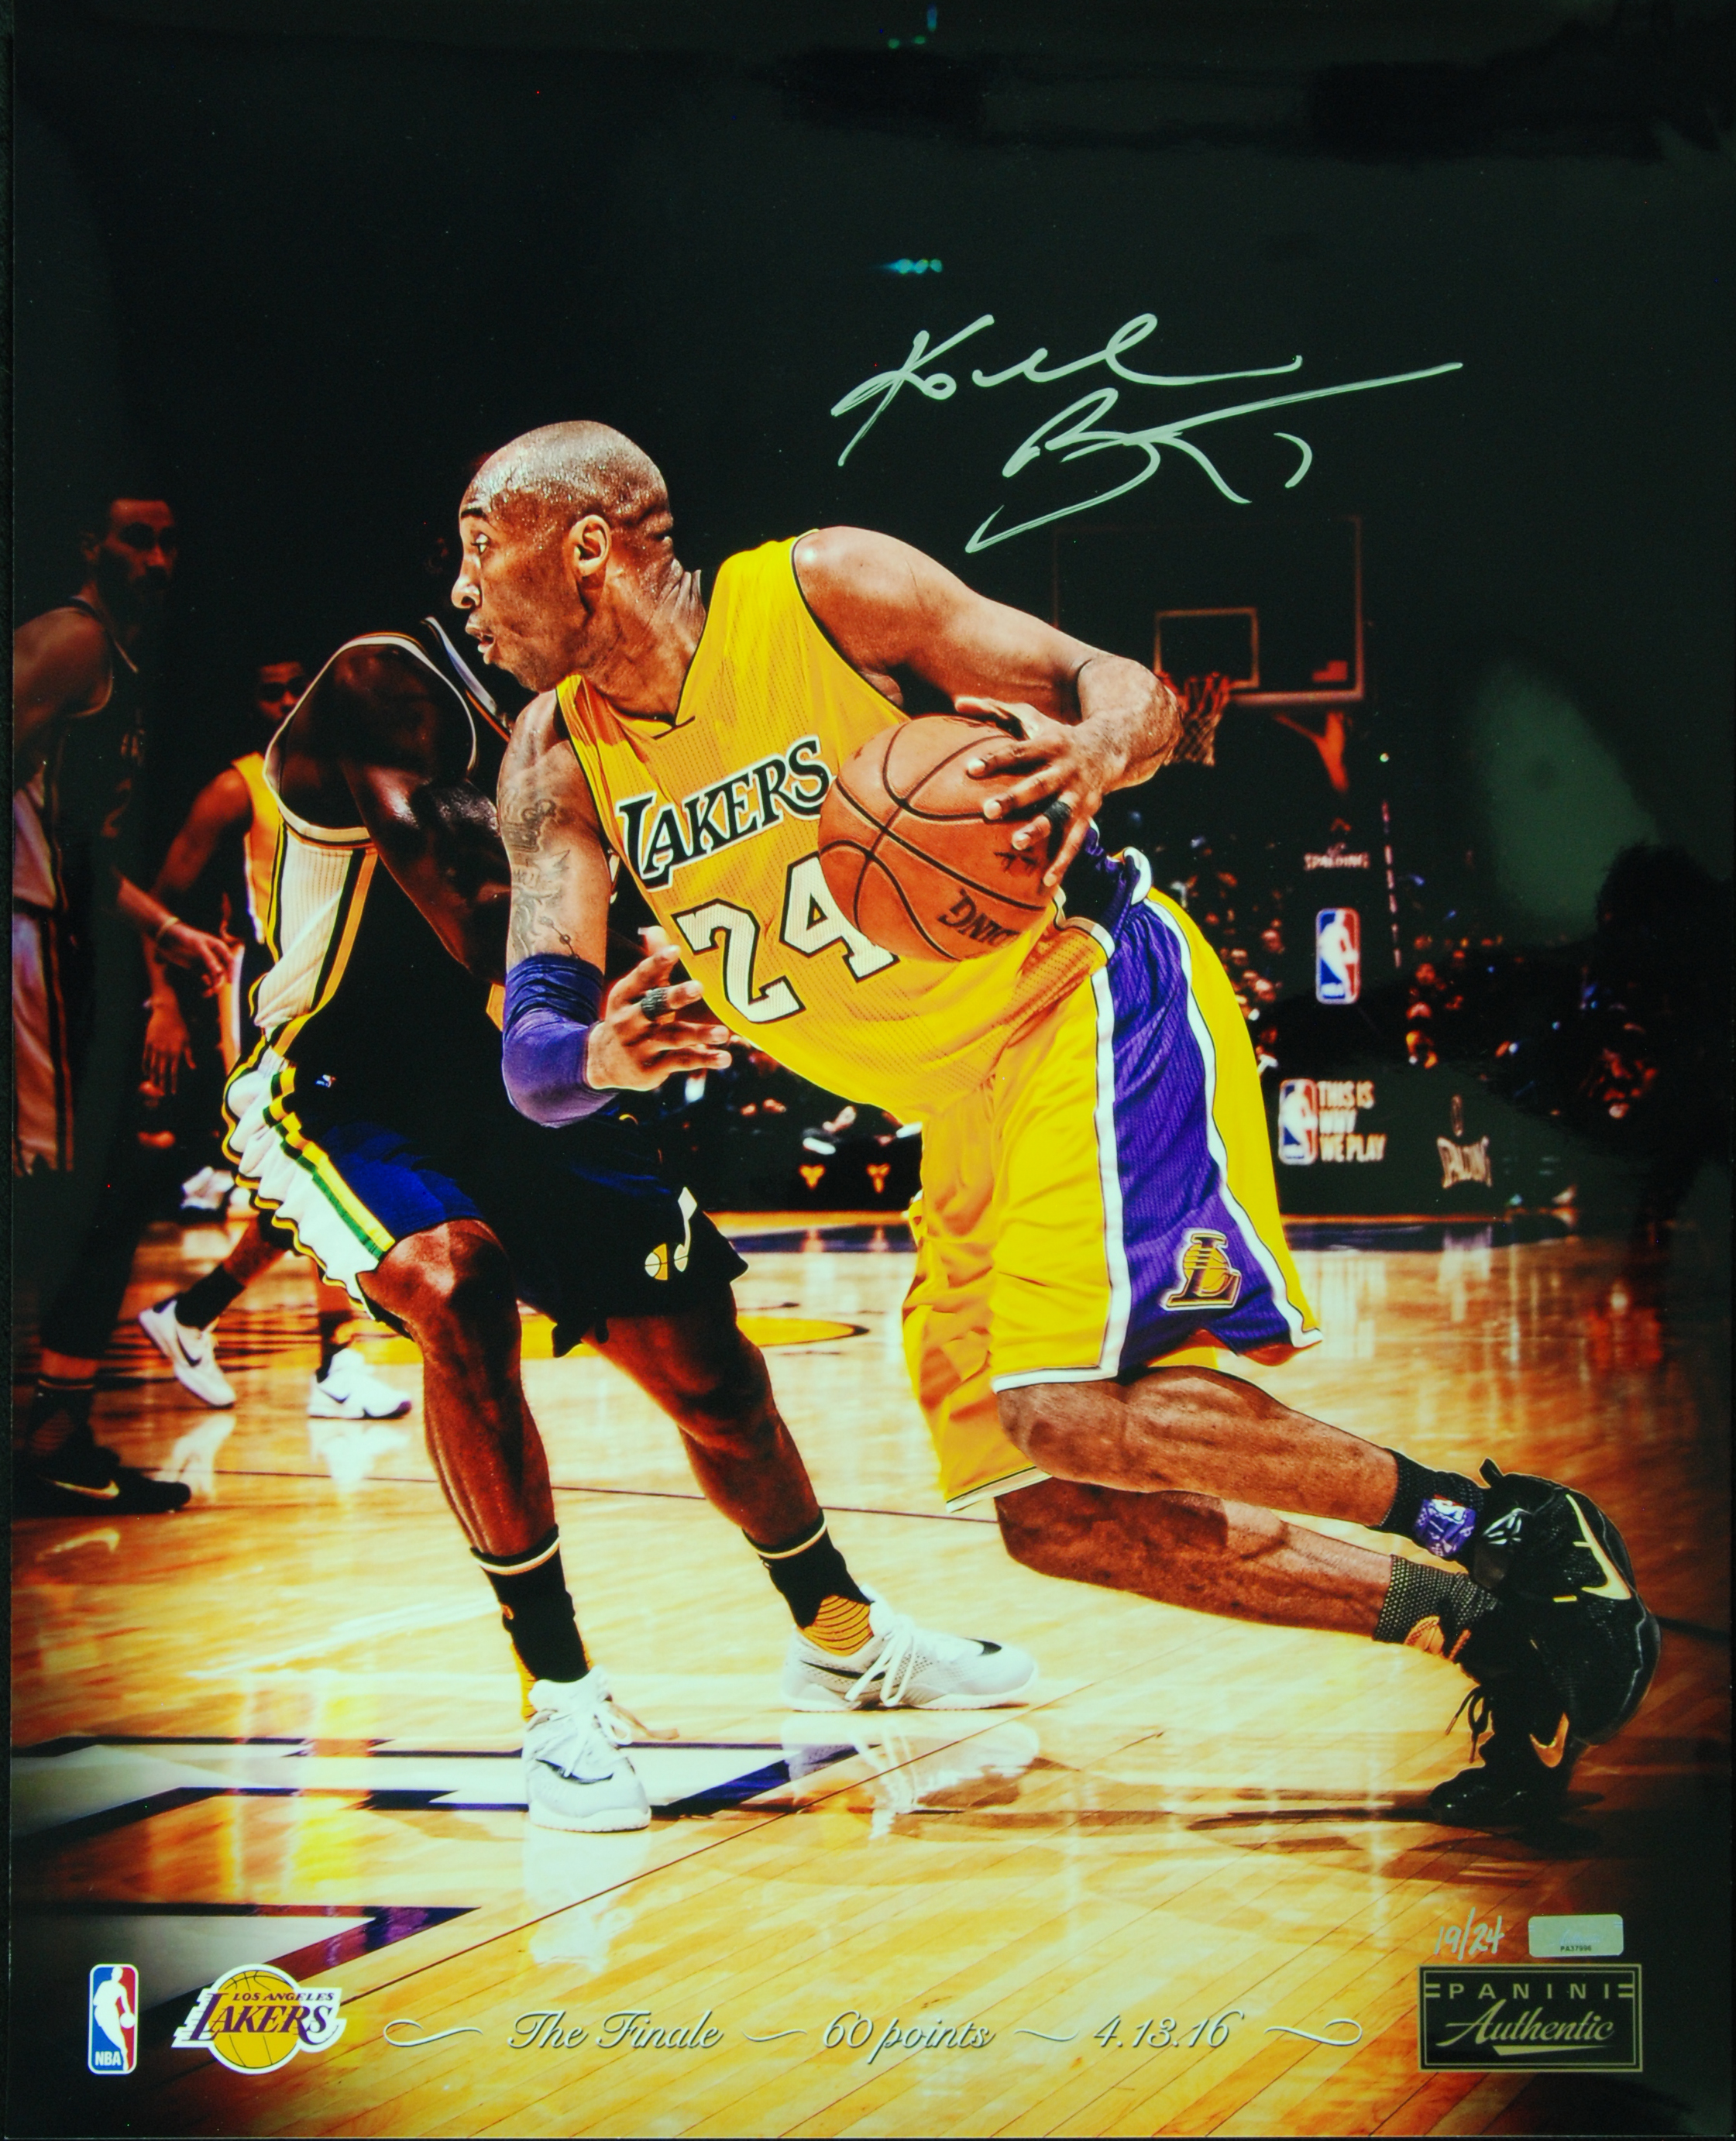 Lot Detail - Kobe Bryant Signed Authentic Los Angeles Lakers